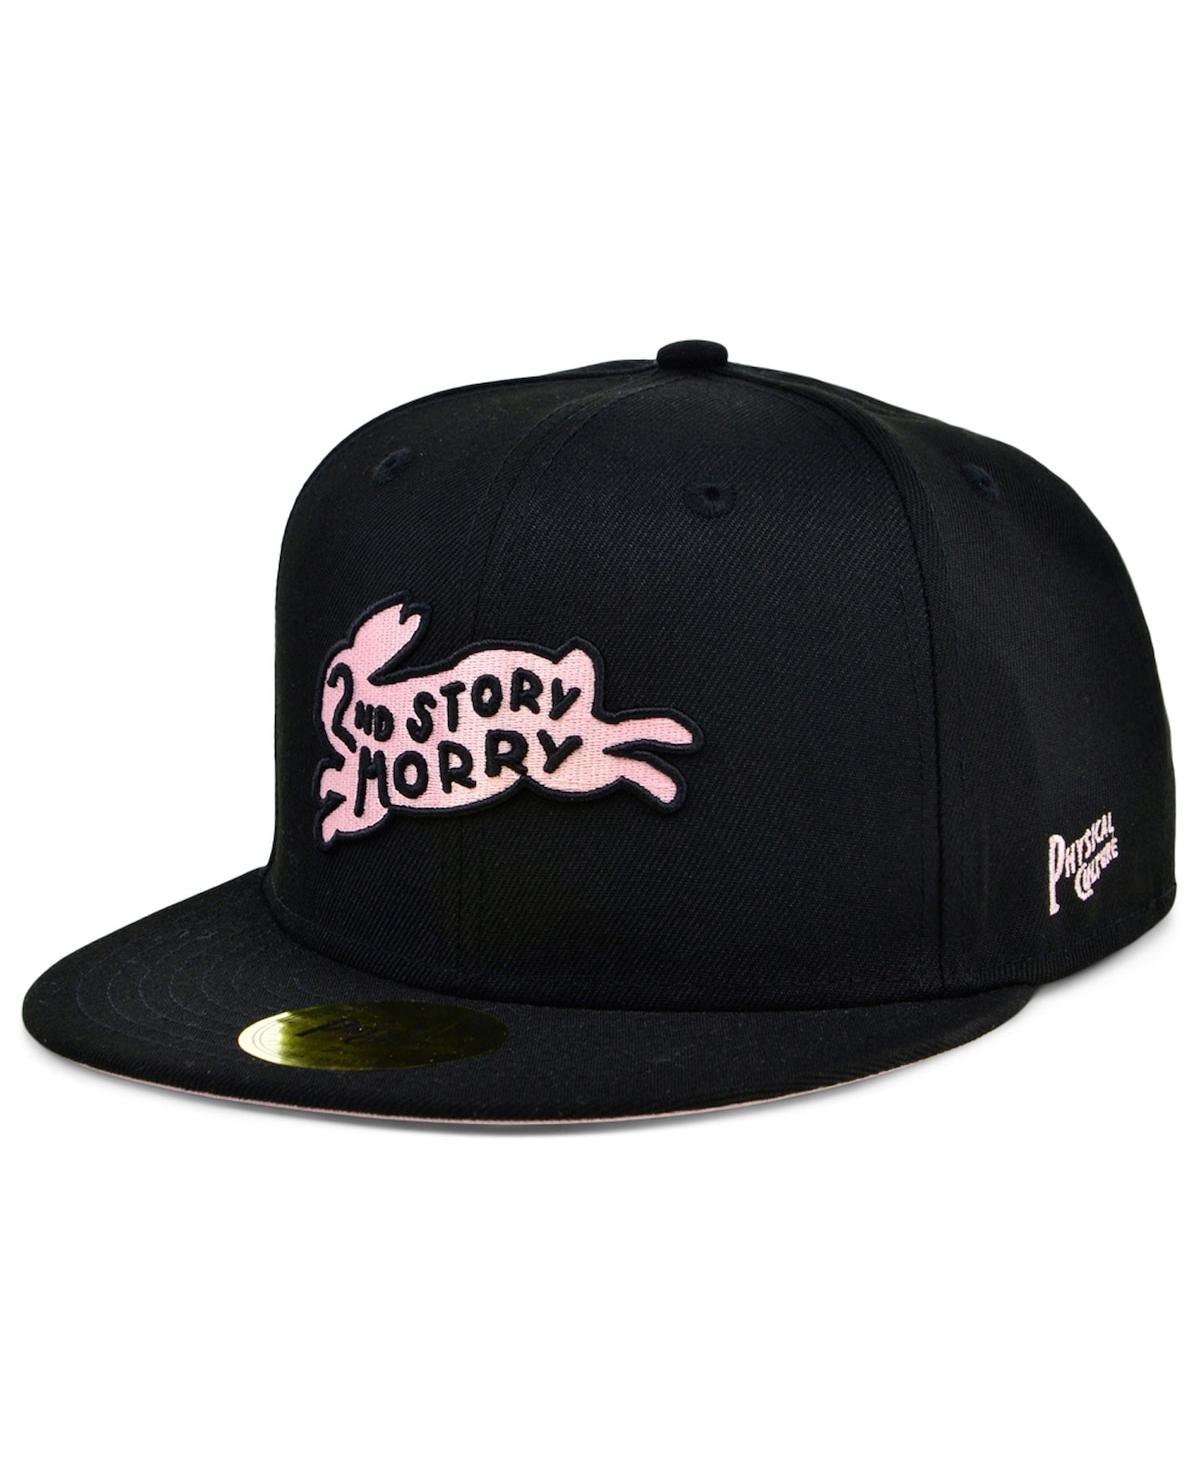 Men's Physical Culture Black Second Story Morrys Black Fives Fitted Hat - Black